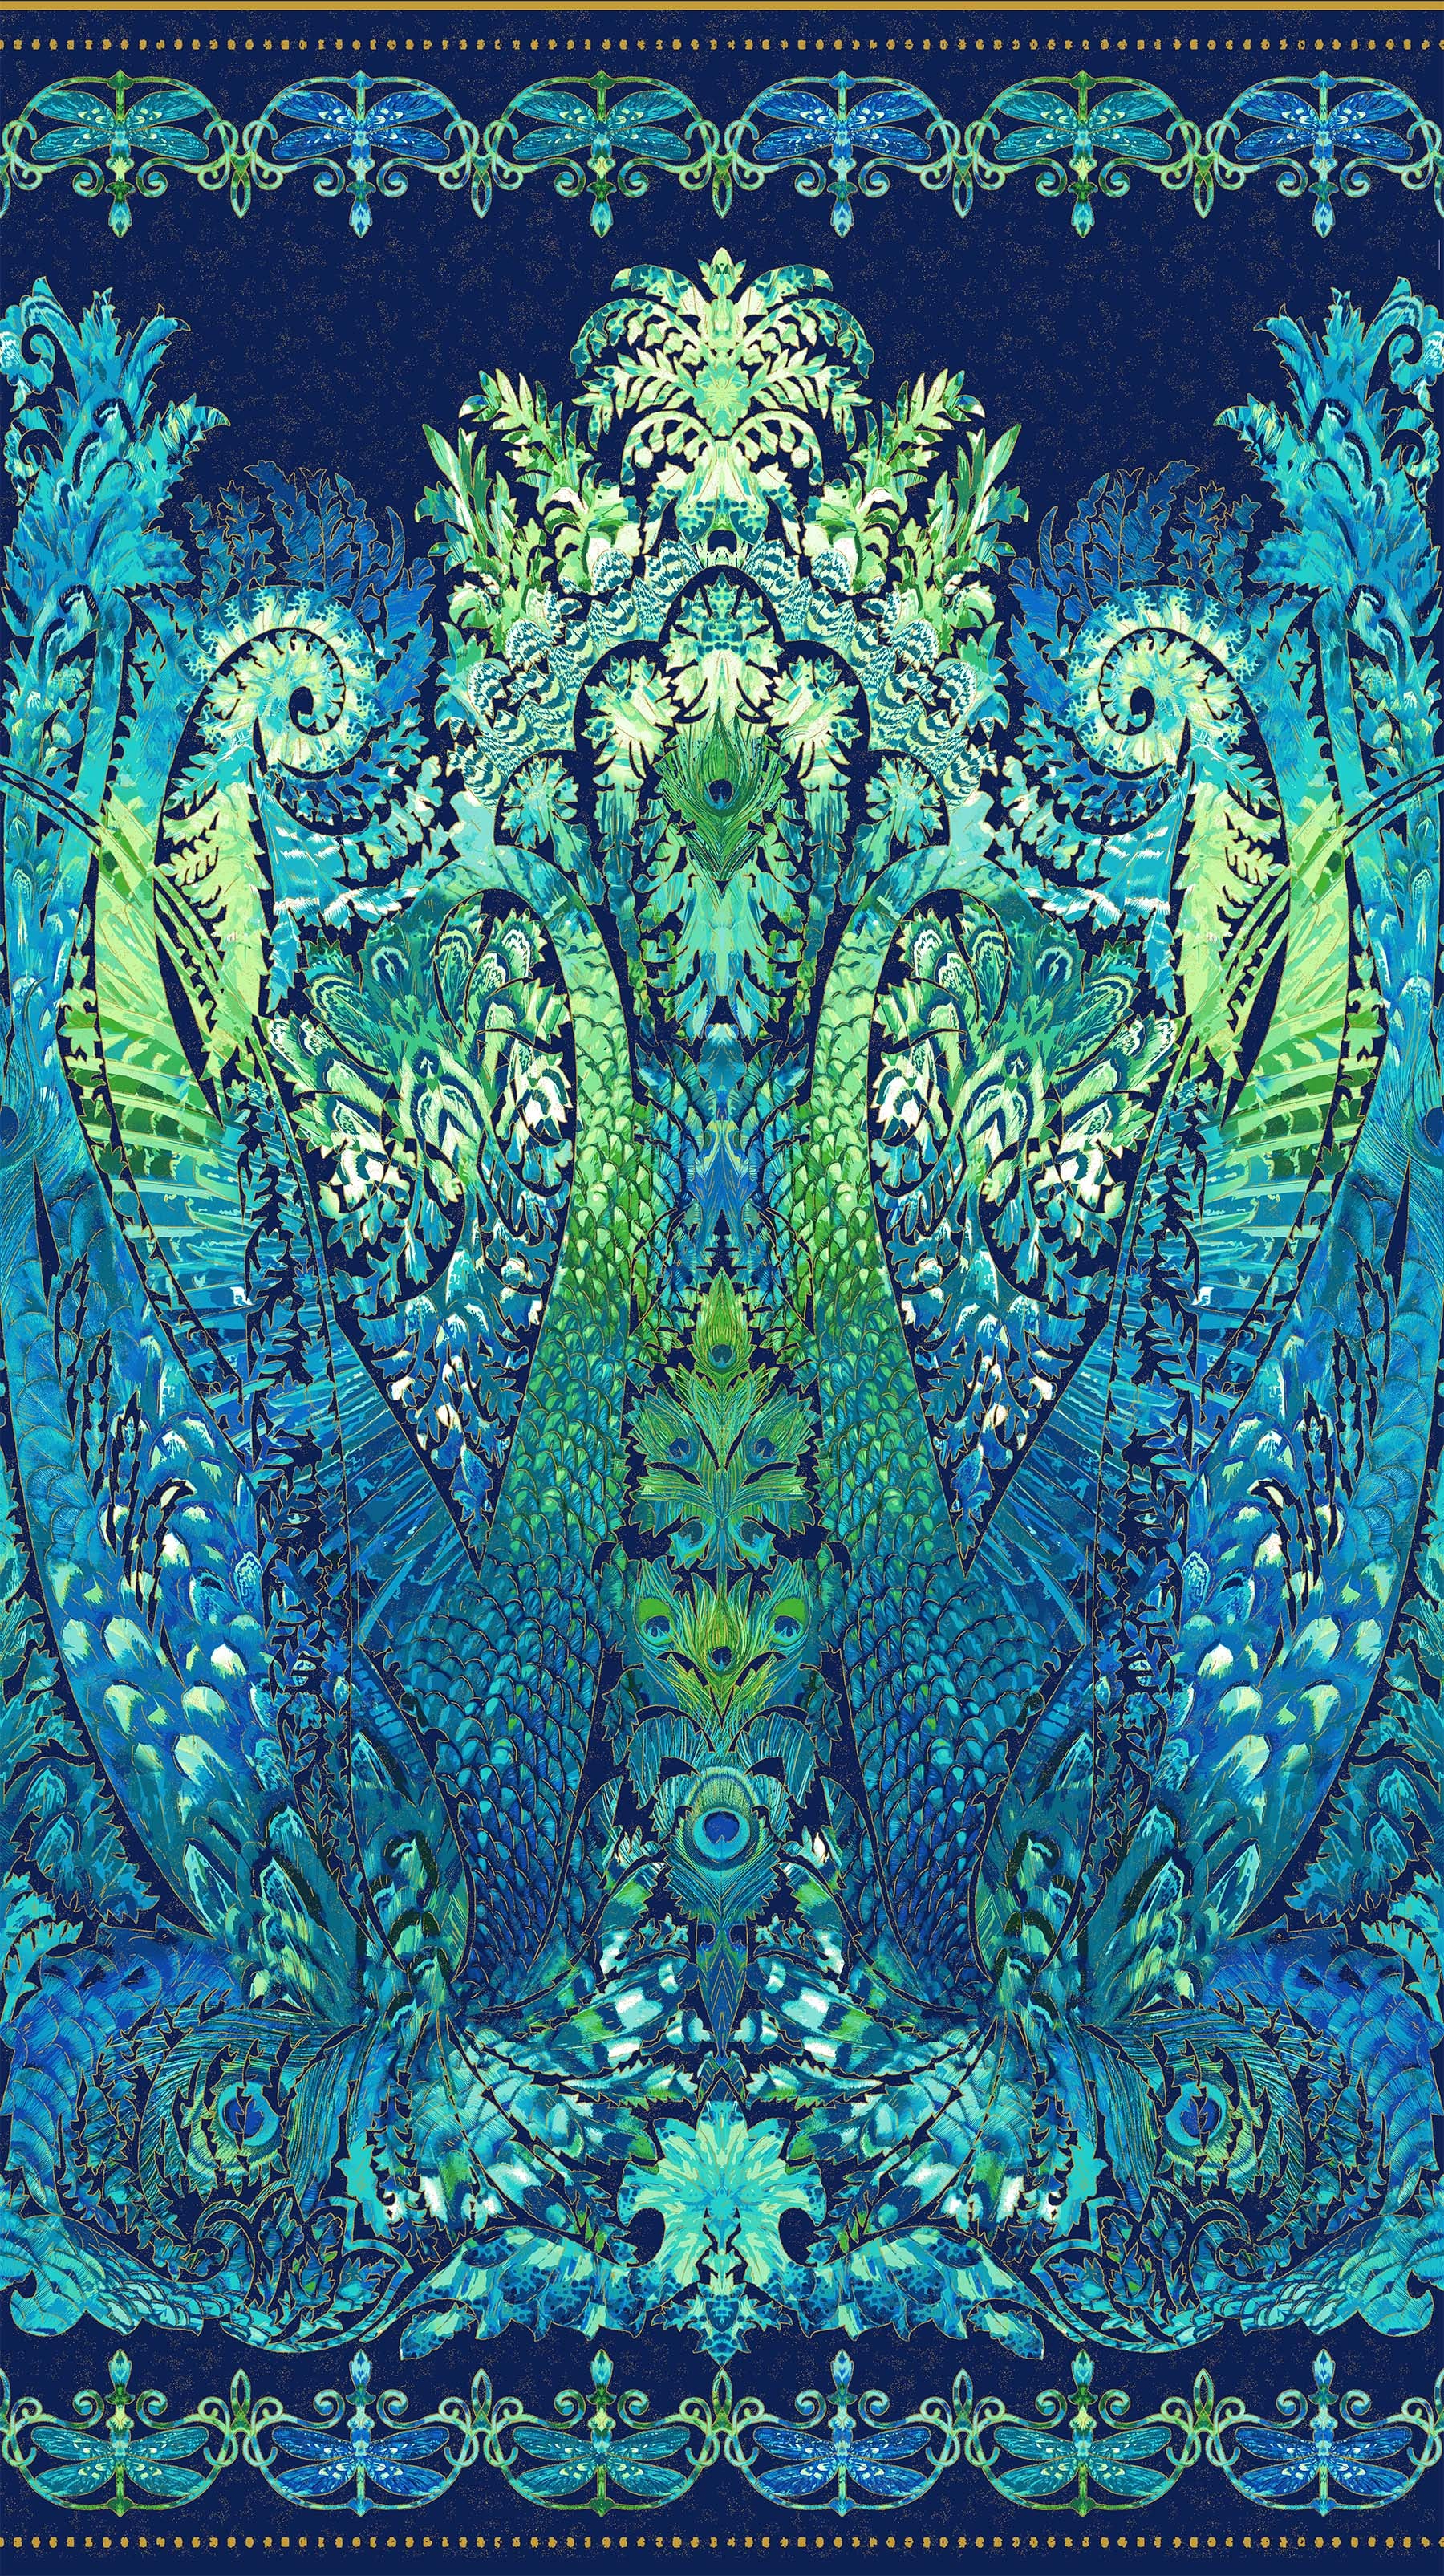 Luminosity - Floral Full Design - Blues and Greens with Metallic Gold Highlights